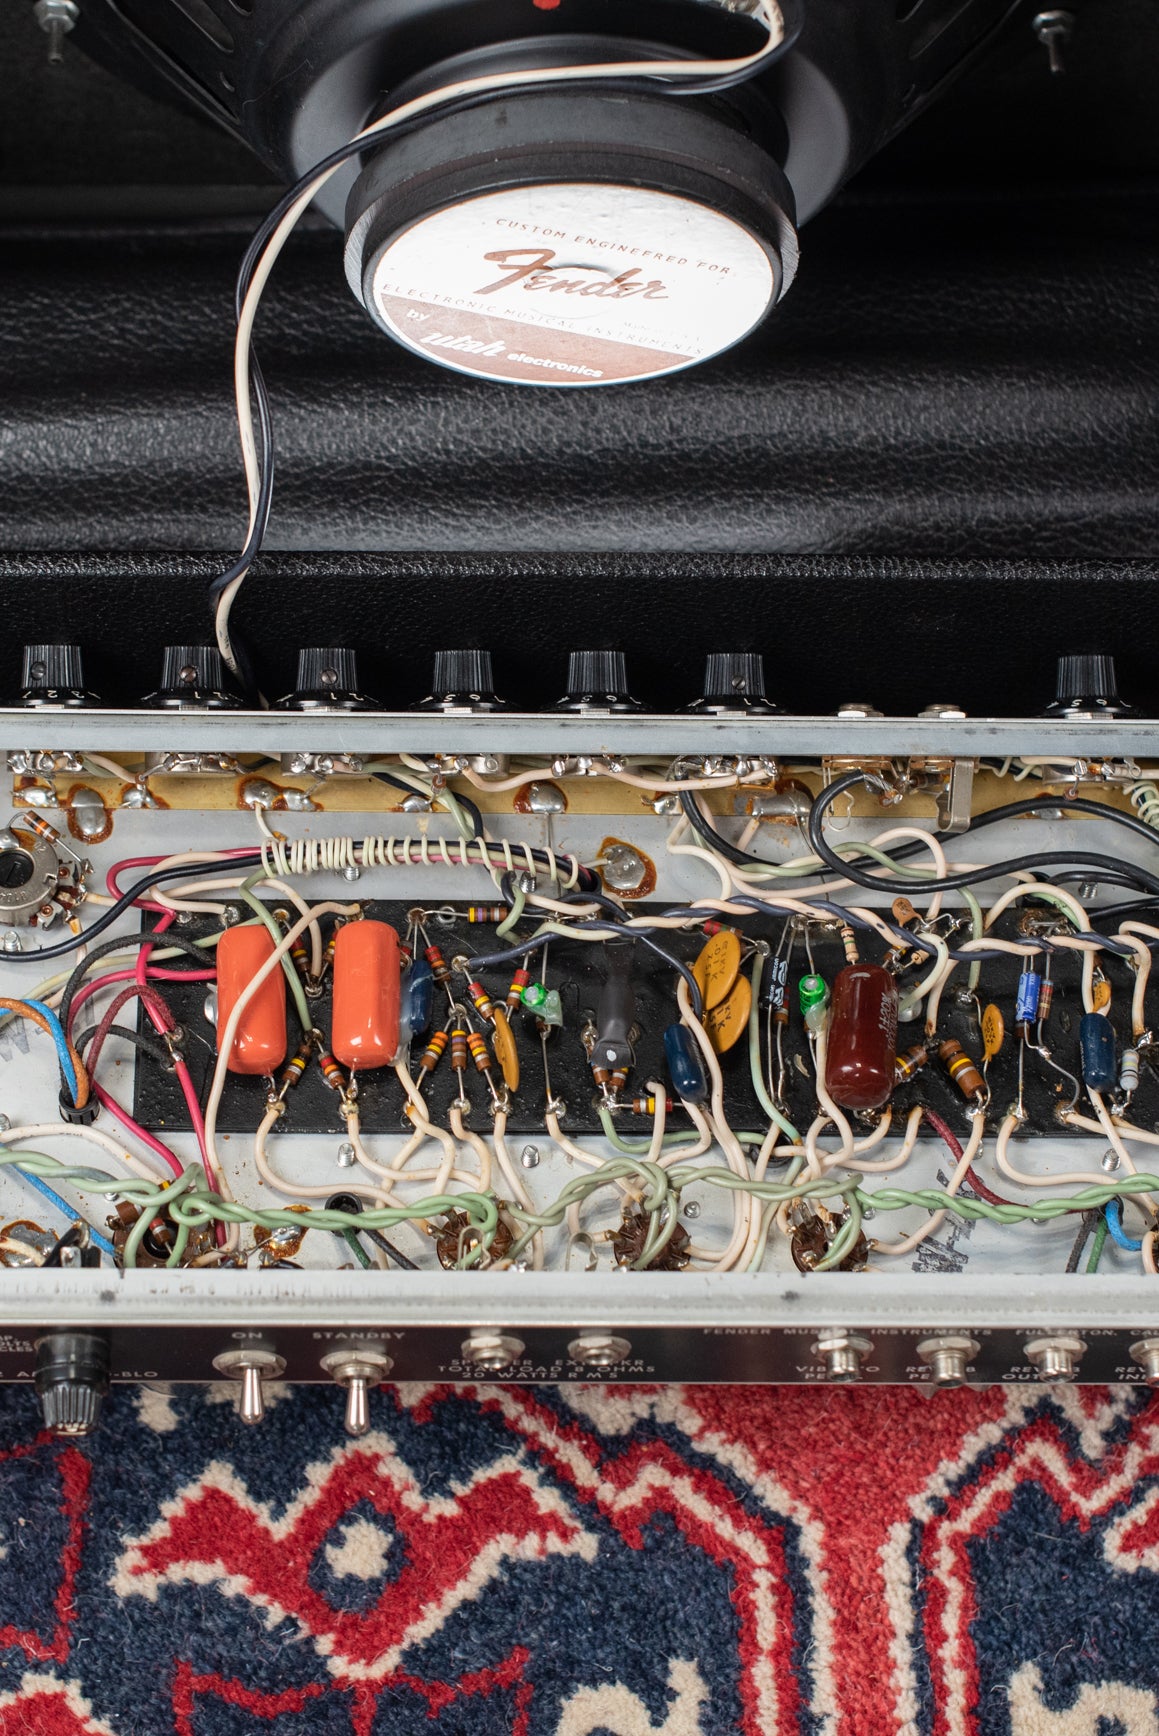 Chassis, circuit board, 1975 Fender Deluxe Reverb